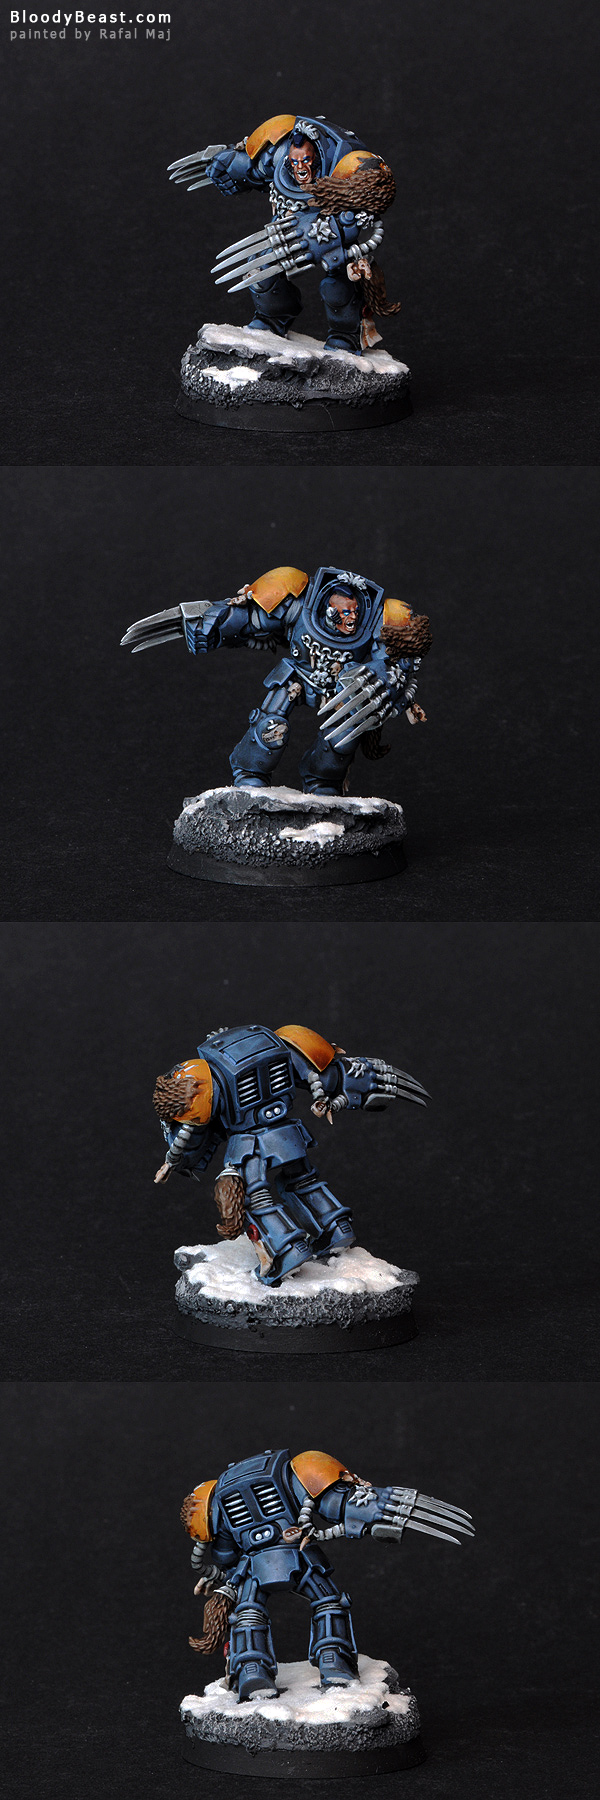 Space Wolves Guard with Wolf Claws painted by Rafal Maj (BloodyBeast.com)